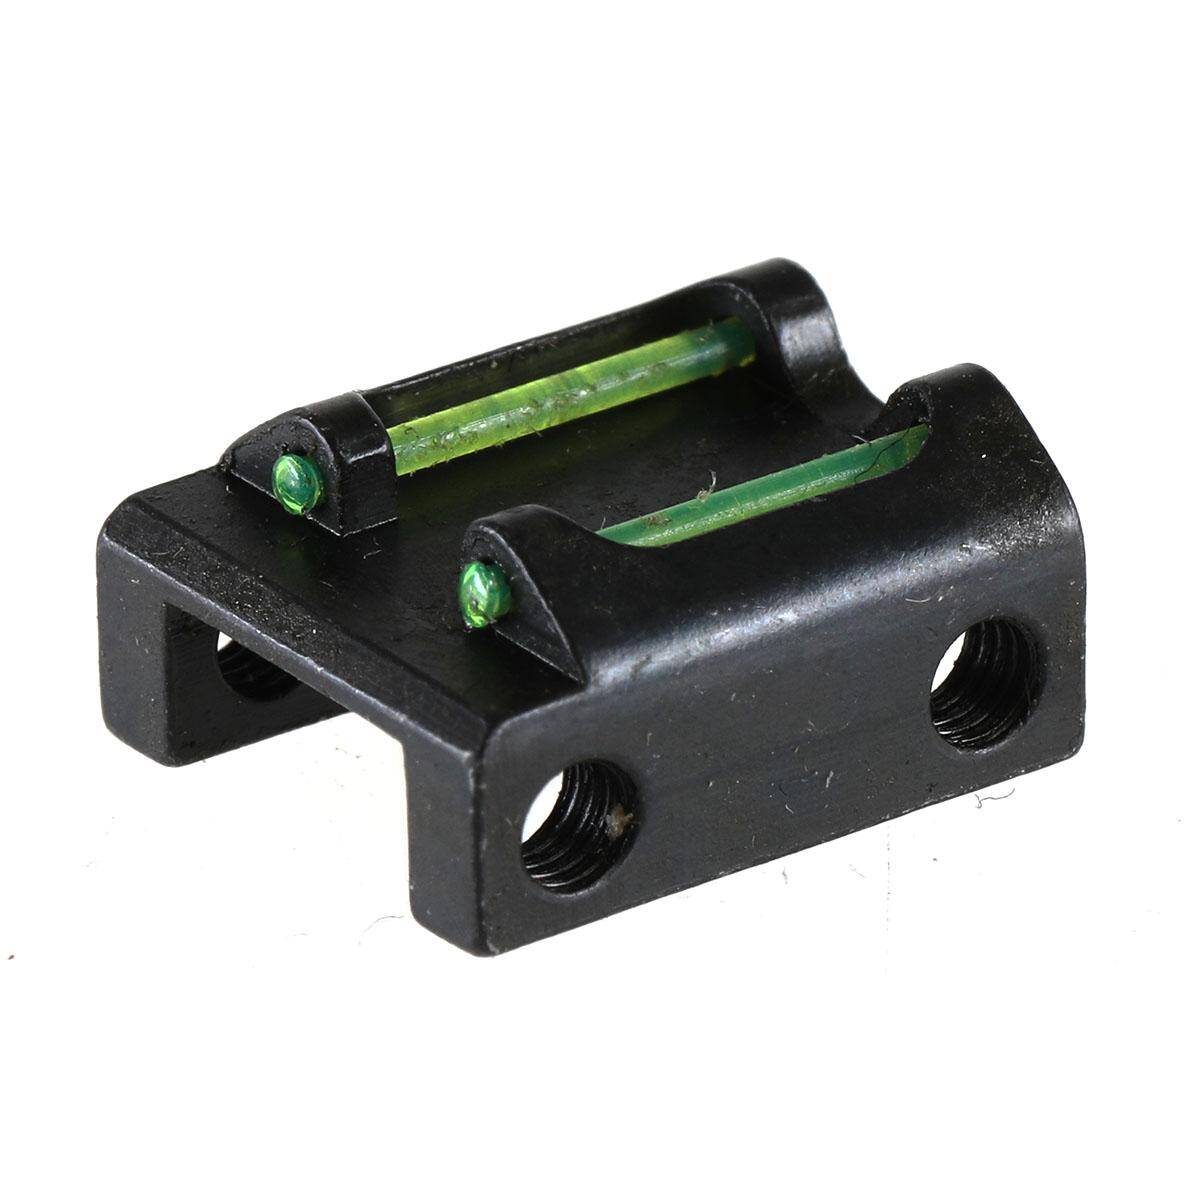 Armsan Rear Sight for A/P-Challange Series